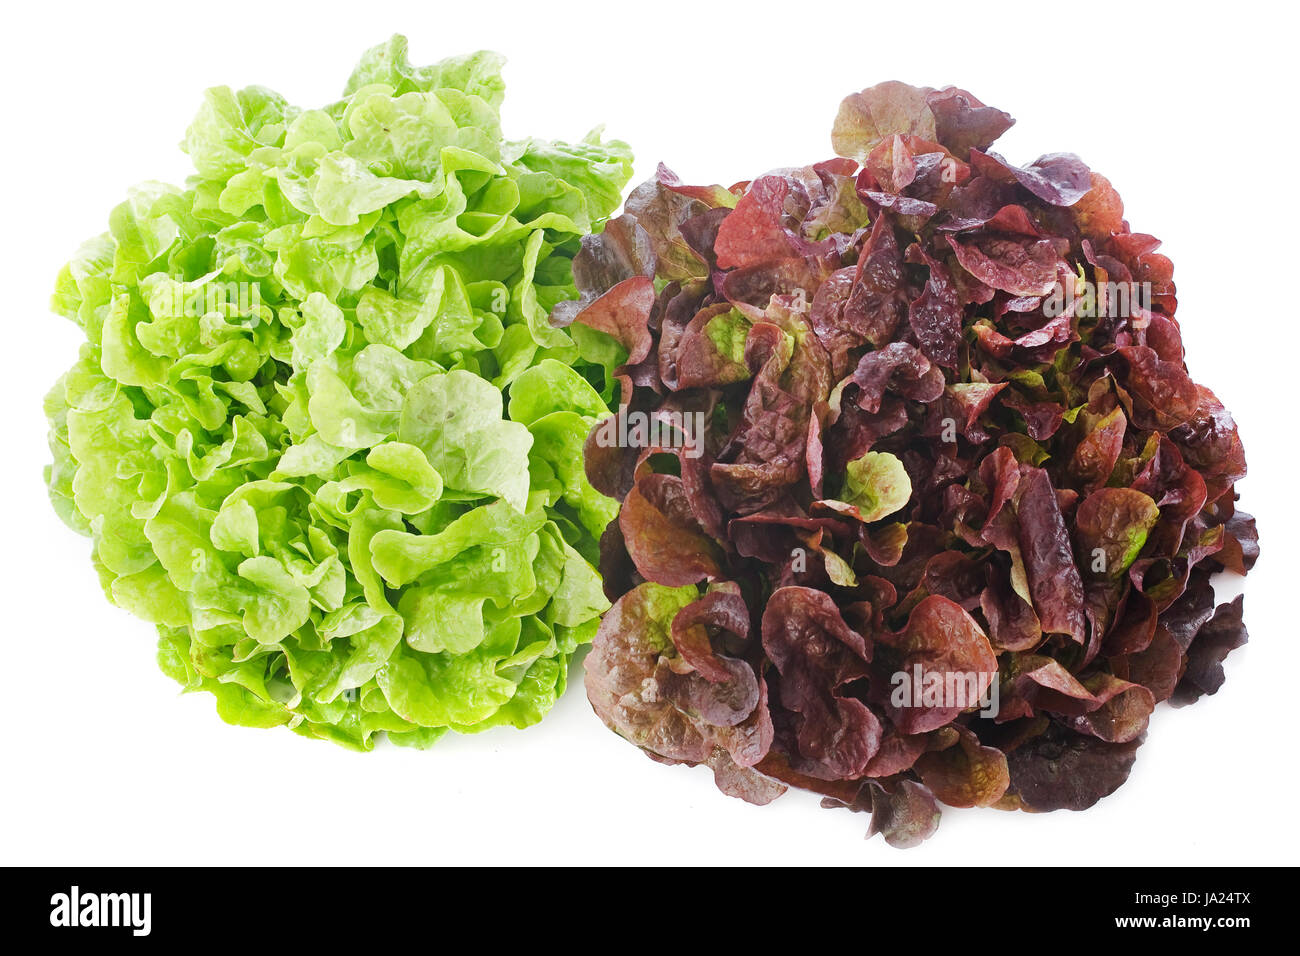 green, vegetable, salad, red, two, food, aliment, freshness, studio, raw, Stock Photo